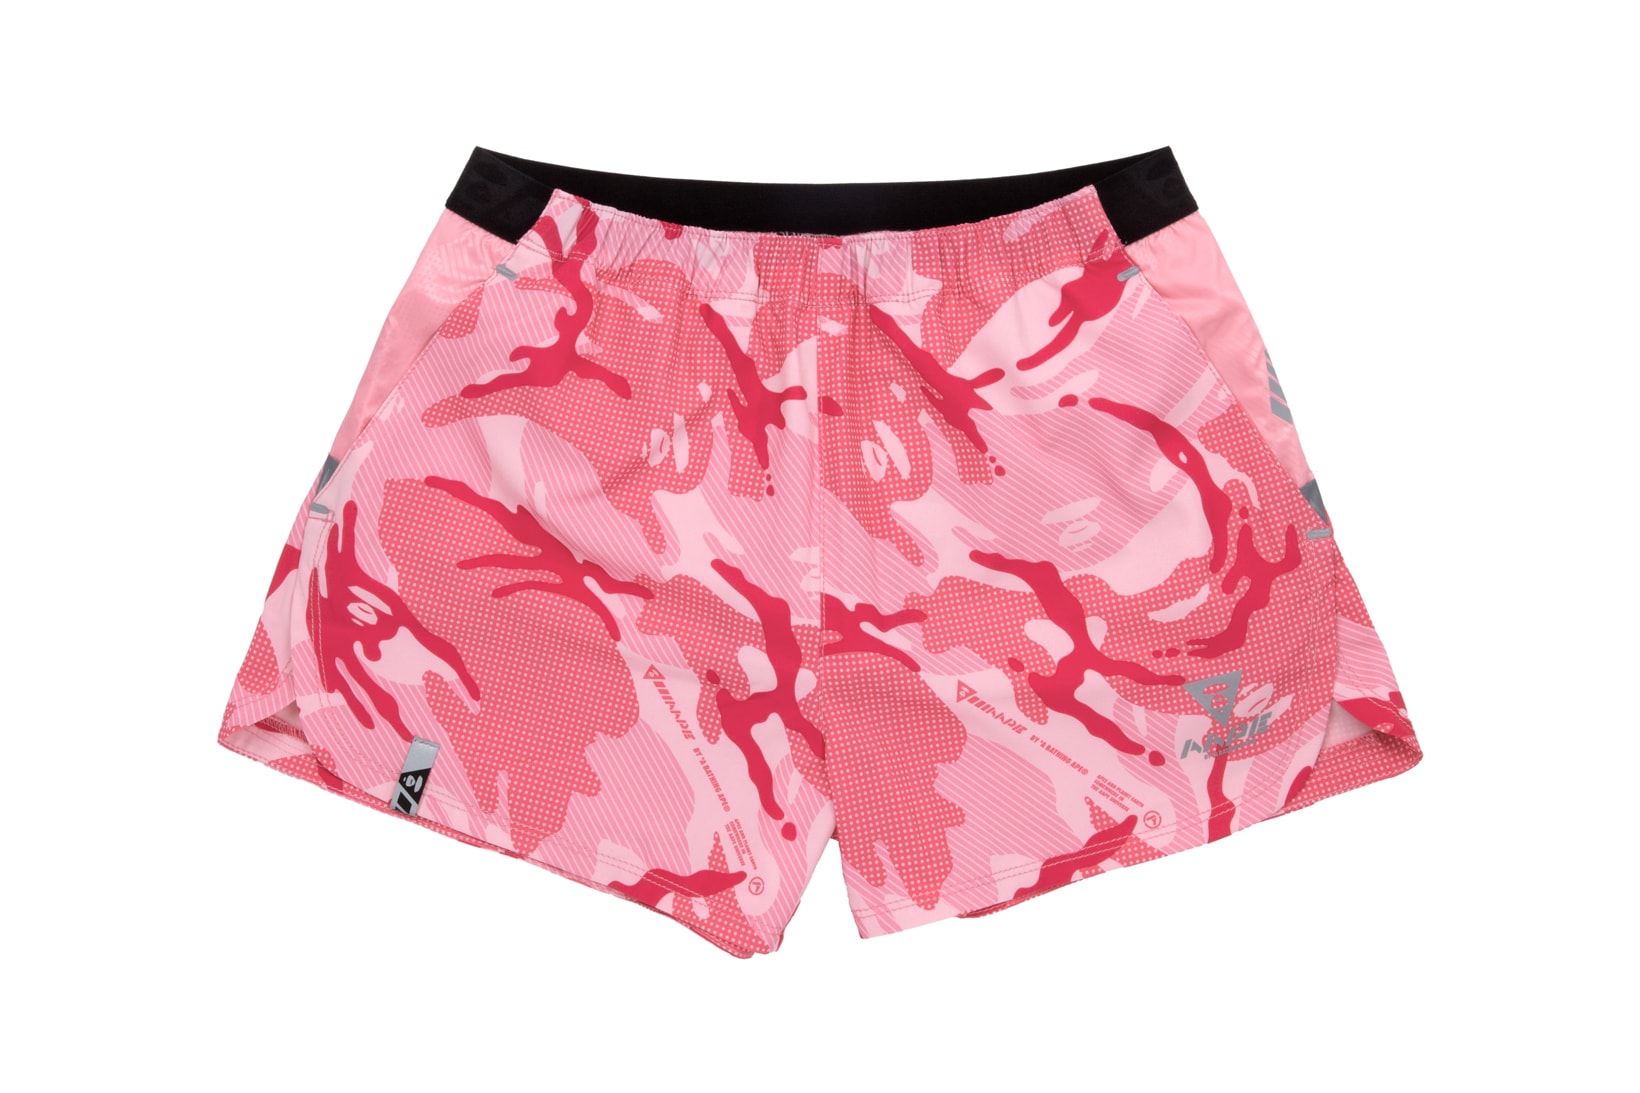 AAPE by A Bathing Ape AAPE+ Women's Athleisure Line Shorts Pink Camo